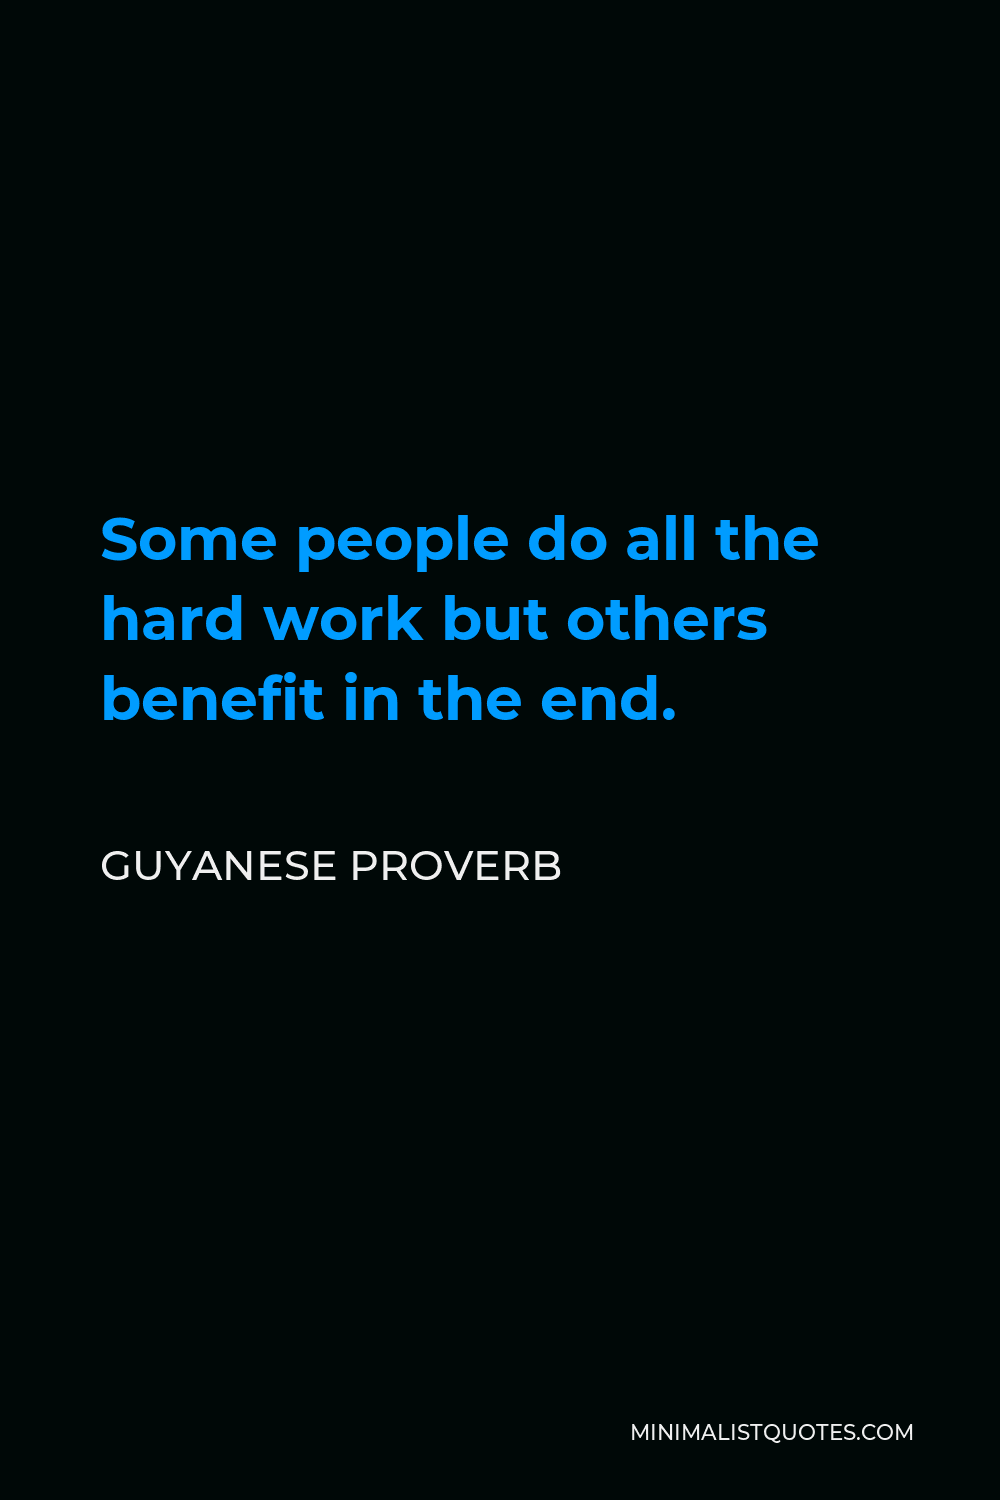 Guyanese Proverb Quote - Some people do all the hard work but others benefit in the end.